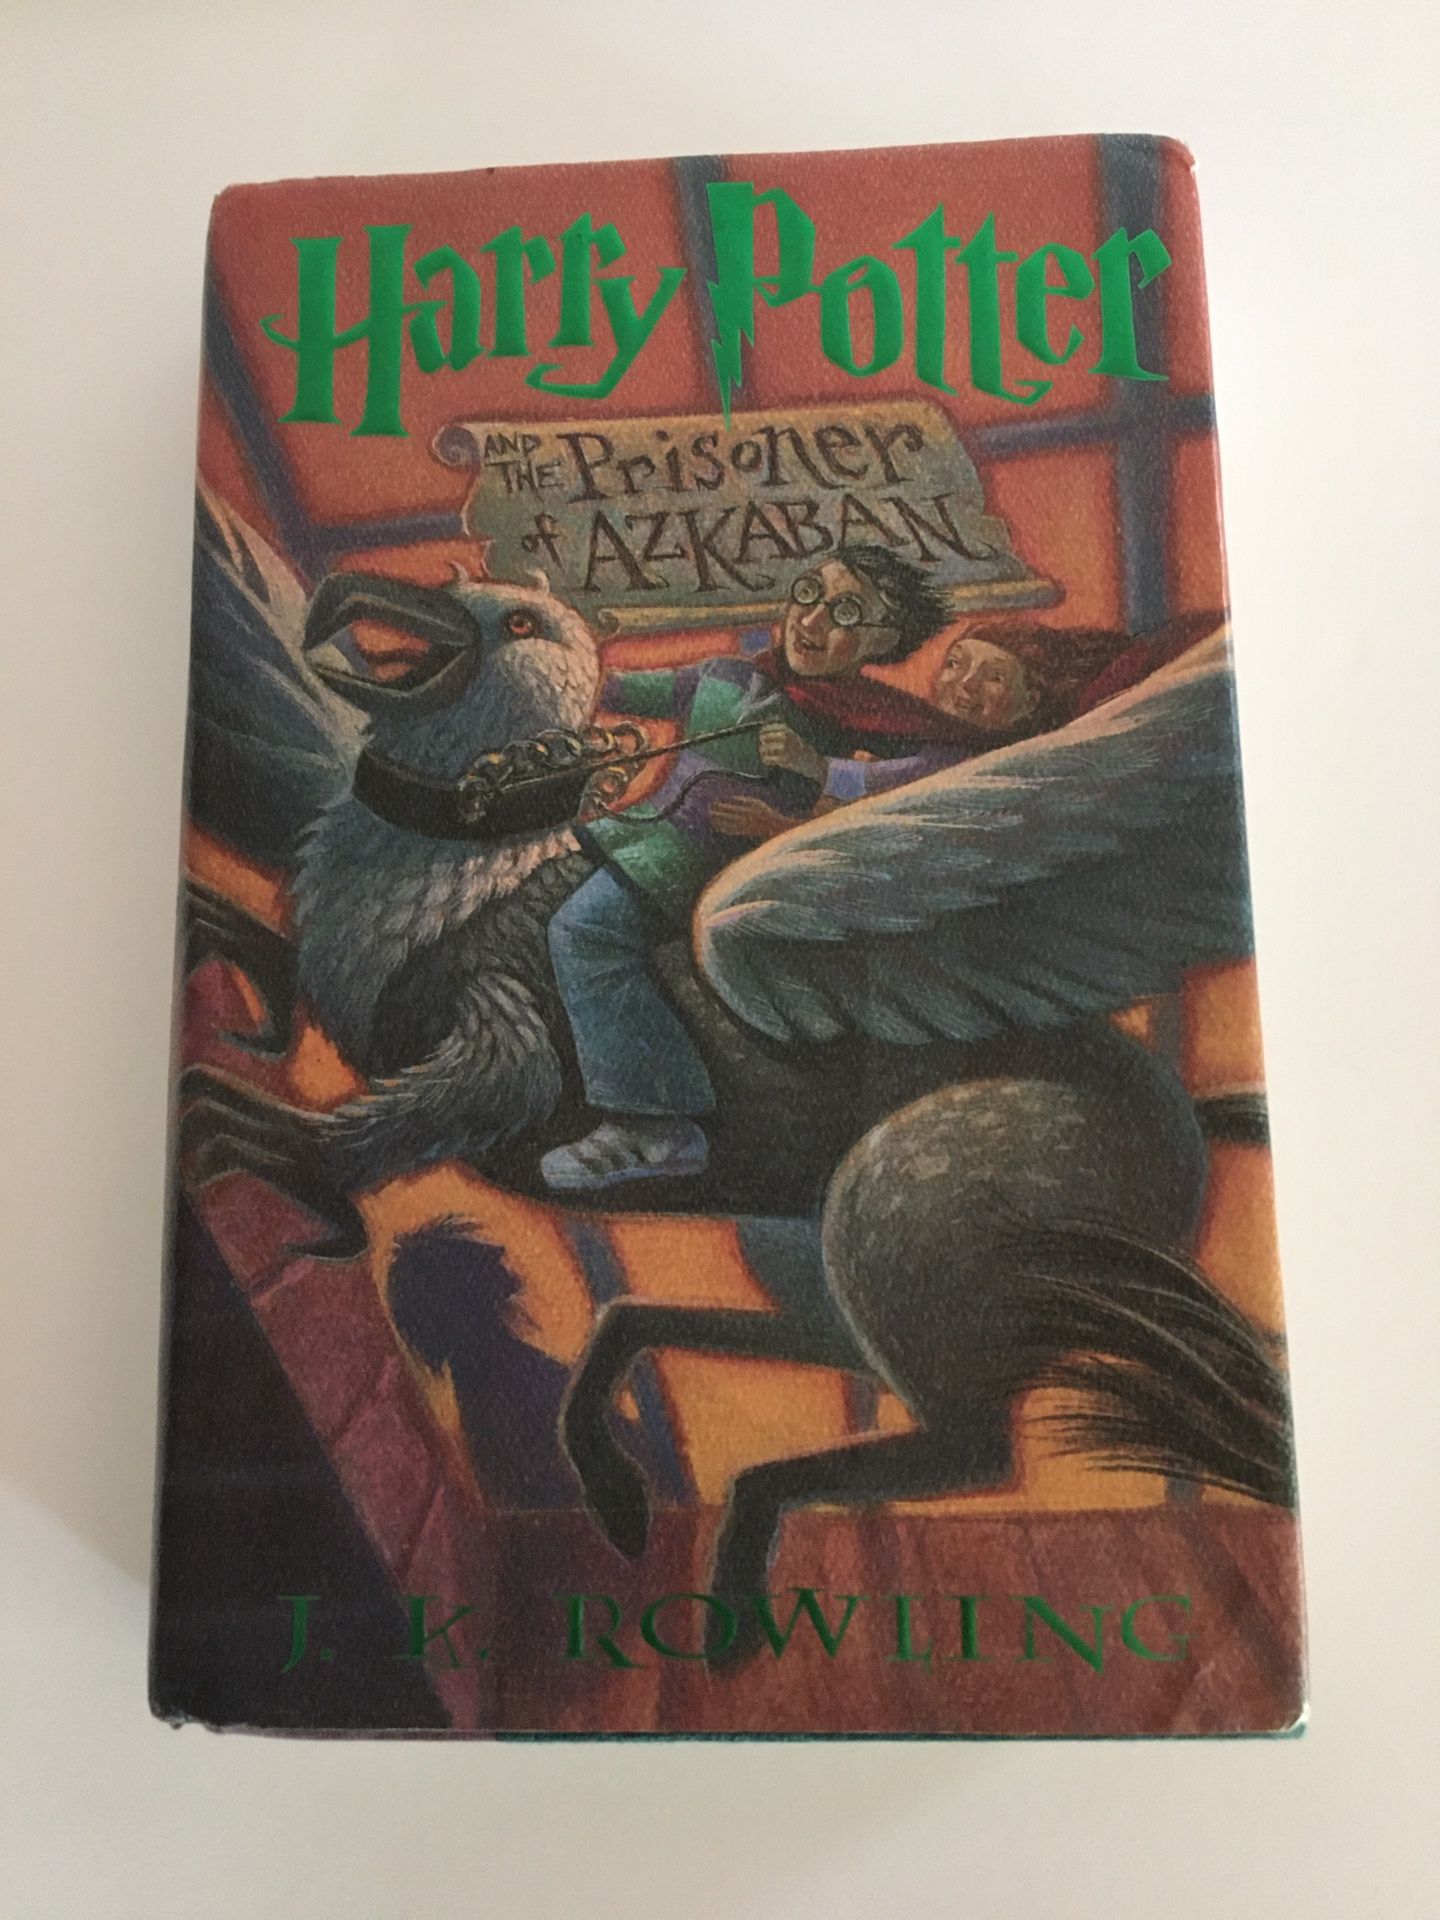 HARRY POTTER AND THE PRISONER OF AZKABAN, First American Edition, Rowling